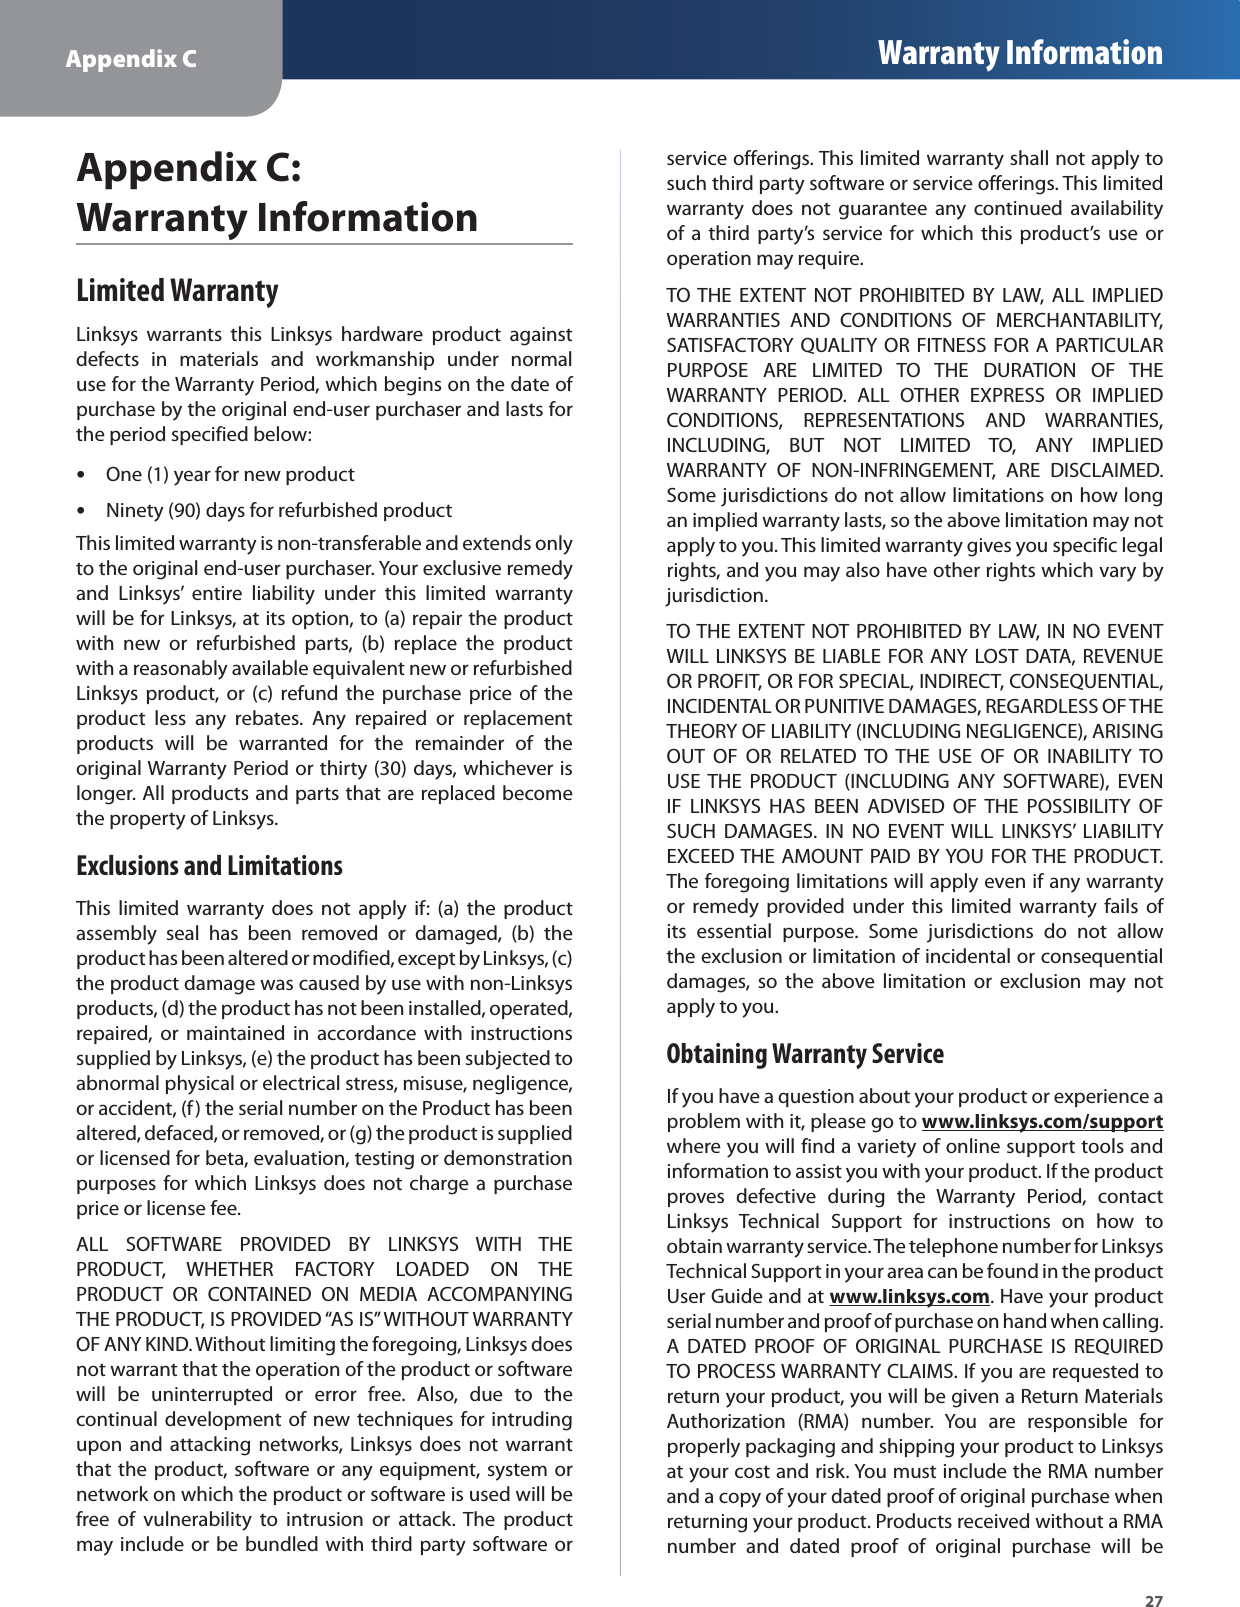 Appendix C Warranty Information27Appendix C: Warranty InformationLimited WarrantyLinksys warrants this Linksys hardware product againstdefects in materials and workmanship under normaluse for the Warranty Period, which begins on the date of purchase by the original end-user purchaser and lasts forthe period specified below:One (1) year for new productsNinety (90) days for refurbished productsThis limited warranty is non-transferable and extends onlyto the original end-user purchaser. Your exclusive remedyand Linksys’ entire liability under this limited warrantywill be for Linksys, at its option, to (a) repair the productwith new or refurbished parts, (b) replace the productwith a reasonably available equivalent new or refurbishedLinksys product, or (c) refund the purchase price of theproduct less any rebates. Any repaired or replacementproducts will be warranted for the remainder of theoriginal Warranty Period or thirty (30) days, whichever islonger. All products and parts that are replaced becomethe property of Linksys.Exclusions and LimitationsThis limited warranty does not apply if: (a) the productassembly seal has been removed or damaged, (b) theproduct has been altered or modified, except by Linksys, (c)the product damage was caused by use with non-Linksys products, (d) the product has not been installed, operated,repaired, or maintained in accordance with instructionssupplied by Linksys, (e) the product has been subjected toabnormal physical or electrical stress, misuse, negligence,or accident, (f) the serial number on the Product has beenaltered, defaced, or removed, or (g) the product is suppliedor licensed for beta, evaluation, testing or demonstrationpurposes for which Linksys does not charge a purchaseprice or license fee.ALL SOFTWARE PROVIDED BY LINKSYS WITH THEPRODUCT, WHETHER FACTORY LOADED ON THEPRODUCT OR CONTAINED ON MEDIA ACCOMPANYINGTHE PRODUCT, IS PROVIDED “AS IS” WITHOUT WARRANTYOF ANY KIND. Without limiting the foregoing, Linksys doesnot warrant that the operation of the product or softwarewill be uninterrupted or error free. Also, due to thecontinual development of new techniques for intrudingupon and attacking networks, Linksys does not warrantthat the product, software or any equipment, system ornetwork on which the product or software is used will befree of vulnerability to intrusion or attack. The productmay include or be bundled with third party software orservice offerings. This limited warranty shall not apply tosuch third party software or service offerings. This limitedwarranty does not guarantee any continued availabilityof a third party’s service for which this product’s use oroperation may require.TO THE EXTENT NOT PROHIBITED BY LAW, ALL IMPLIEDWARRANTIES AND CONDITIONS OF MERCHANTABILITY,SATISFACTORY QUALITY OR FITNESS FOR A PARTICULARPURPOSE ARE LIMITED TO THE DURATION OF THEWARRANTY PERIOD. ALL OTHER EXPRESS OR IMPLIEDCONDITIONS, REPRESENTATIONS AND WARRANTIES,INCLUDING, BUT NOT LIMITED TO, ANY IMPLIEDWARRANTY OF NON-INFRINGEMENT, ARE DISCLAIMED.Some jurisdictions do not allow limitations on how longan implied warranty lasts, so the above limitation may notapply to you. This limited warranty gives you specific legalrights, and you may also have other rights which vary byjurisdiction.TO THE EXTENT NOT PROHIBITED BY LAW, IN NO EVENT WILL LINKSYS BE LIABLE FOR ANY LOST DATA, REVENUEOR PROFIT, OR FOR SPECIAL, INDIRECT, CONSEQUENTIAL,INCIDENTAL OR PUNITIVE DAMAGES, REGARDLESS OF THETHEORY OF LIABILITY (INCLUDING NEGLIGENCE), ARISINGOUT OF OR RELATED TO THE USE OF OR INABILITY TOUSE THE PRODUCT (INCLUDING ANY SOFTWARE), EVENIF LINKSYS HAS BEEN ADVISED OF THE POSSIBILITY OFSUCH DAMAGES. IN NO EVENT WILL LINKSYS’ LIABILITYEXCEED THE AMOUNT PAID BY YOU FOR THE PRODUCT.The foregoing limitations will apply even if any warrantyor remedy provided under this limited warranty fails of its essential purpose. Some jurisdictions do not allowthe exclusion or limitation of incidental or consequentialdamages, so the above limitation or exclusion may notapply to you.Obtaining Warranty ServiceIf you have a question about your product or experience aproblem with it, please go towww.linksys.com/supportyppwhere you will find a variety of online support tools andinformation to assist you with your product. If the productproves defective during the Warranty Period, contactLinksys Technical Support for instructions on how toobtain warranty service. The telephone number for LinksysTechnical Support in your area can be found in the productUser Guide and atwww.linksys.comy. Have your productserial number and proof of purchase on hand when calling.A DATED PROOF OF ORIGINAL PURCHASE IS REQUIREDTO PROCESS WARRANTY CLAIMS. If you are requested toreturn your product, you will be given a Return MaterialsAuthorization (RMA) number. You are responsible forproperly packaging and shipping your product to Linksysat your cost and risk. You must include the RMA numberand a copy of your dated proof of original purchase whenreturning your product. Products received without a RMAnumber and dated proof of original purchase will be